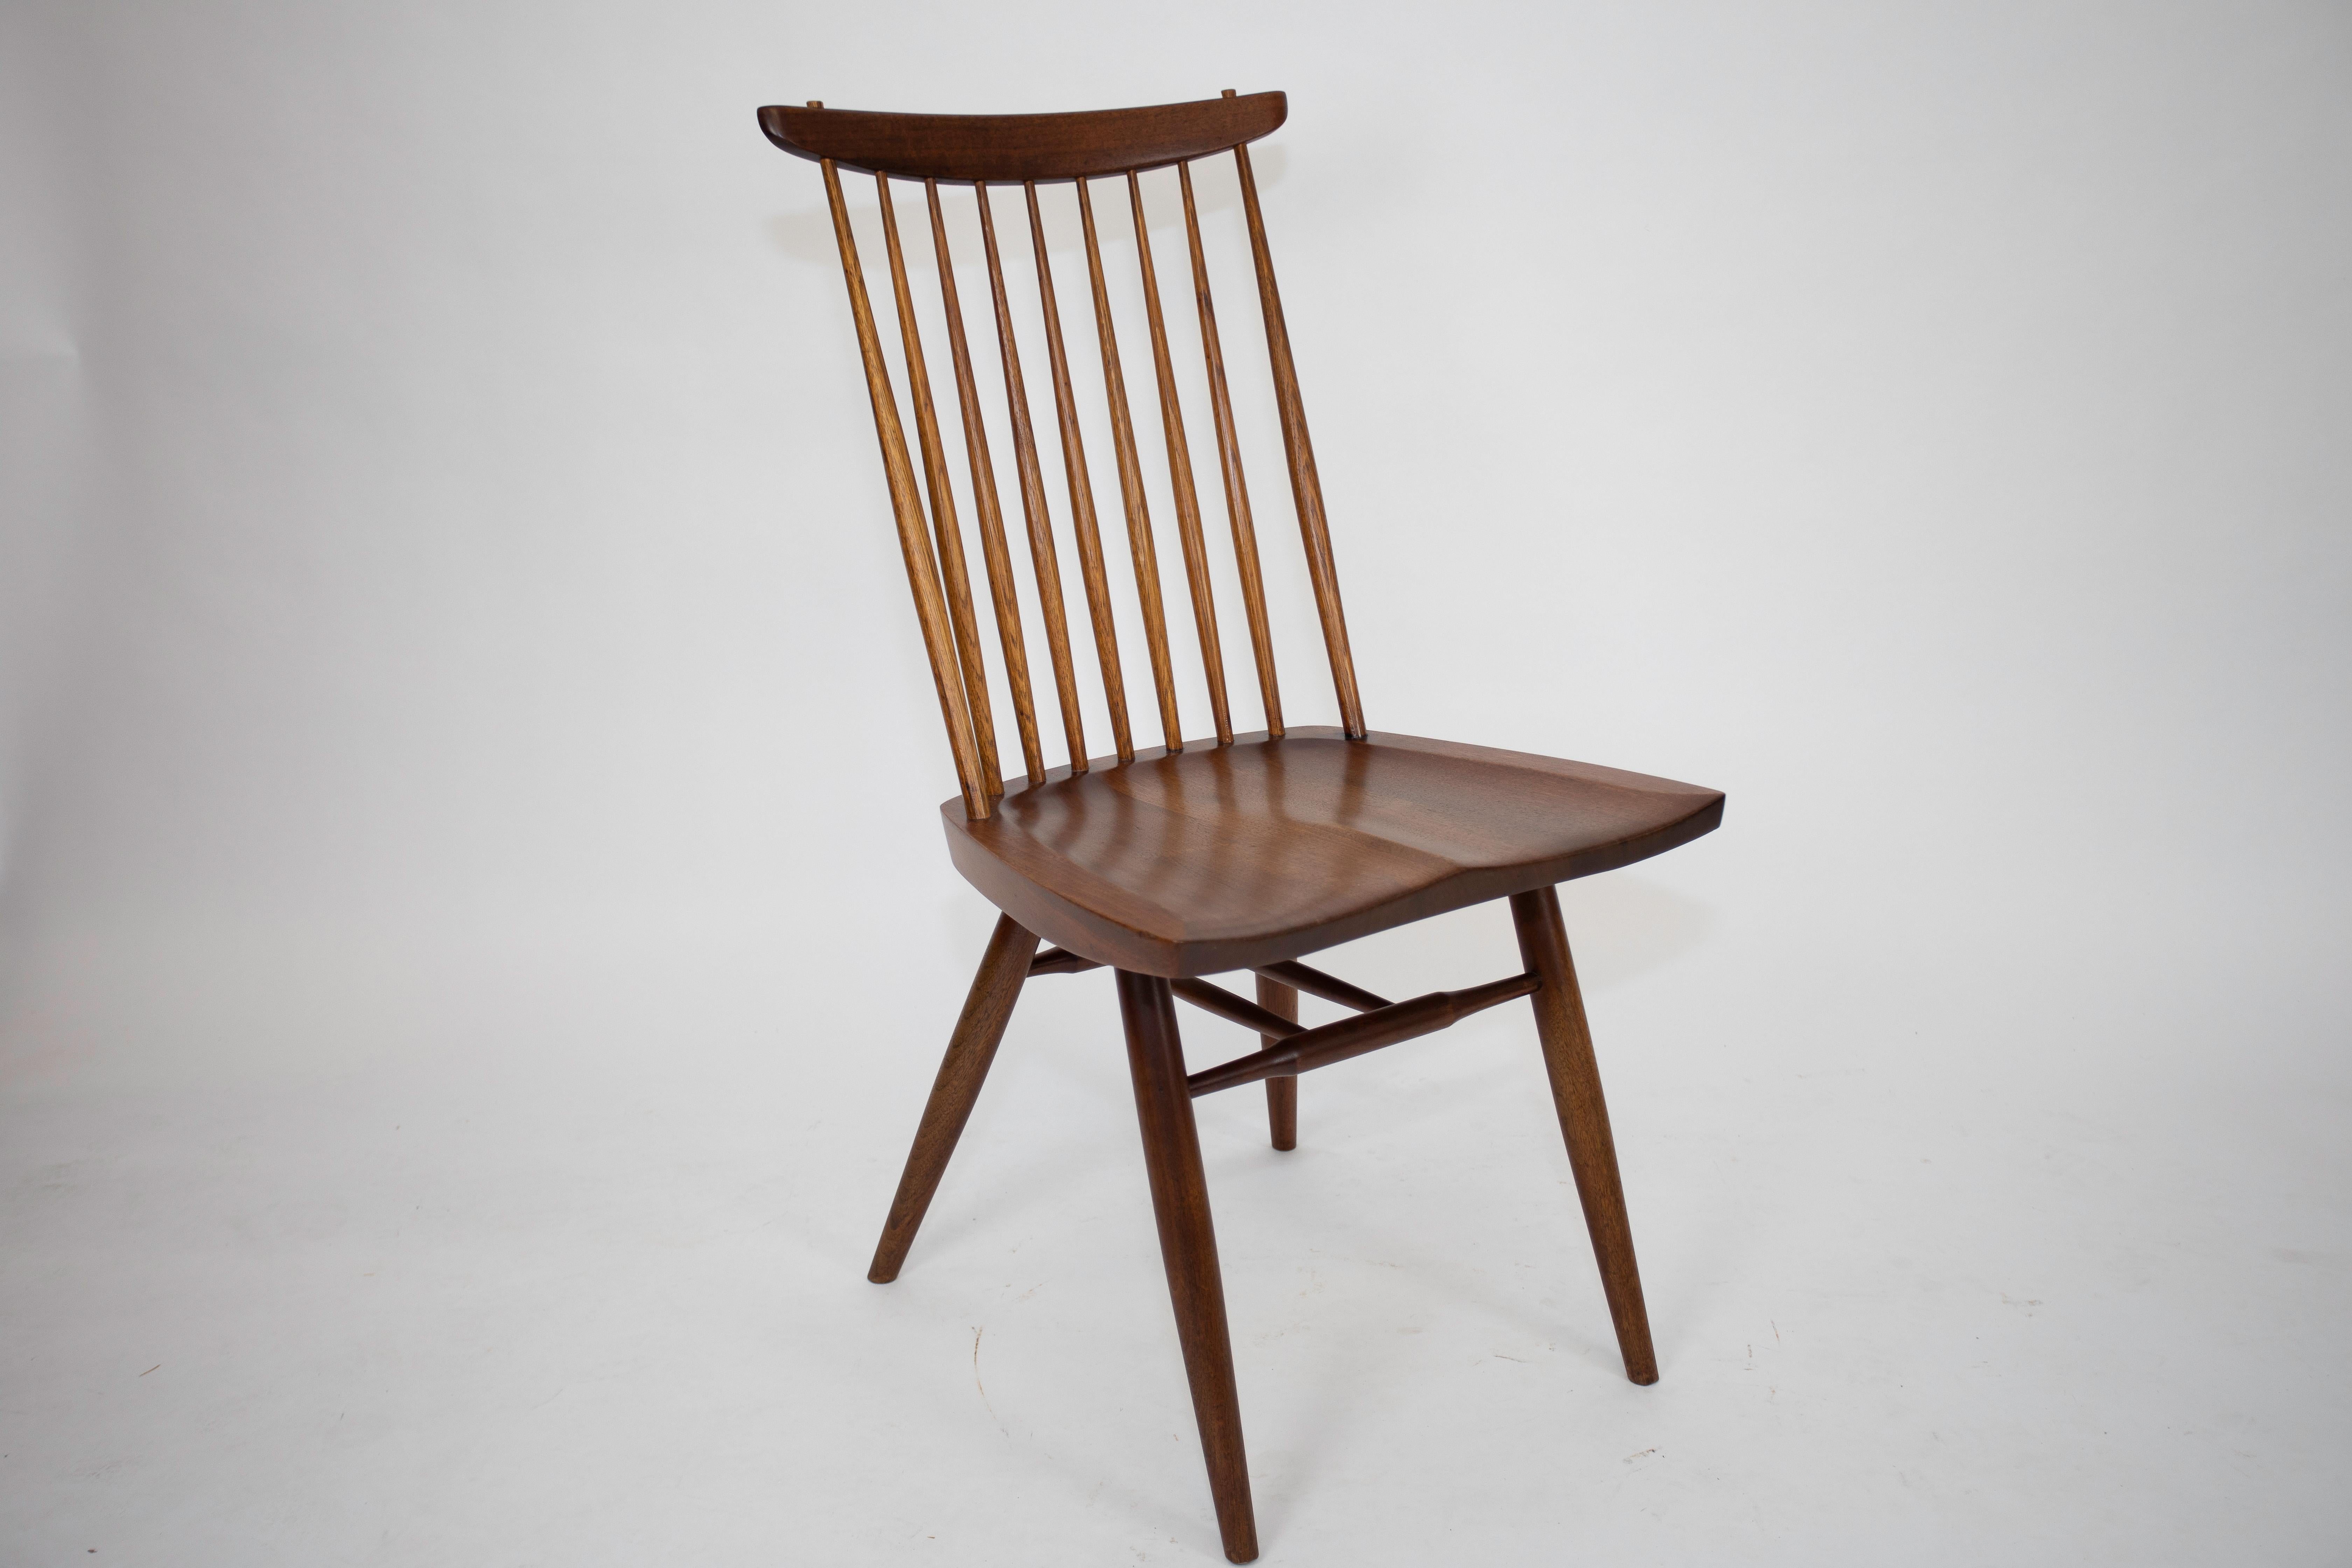 Set of 4 George Nakashima chairs
Matched Set
Cleaned and Re-Oiled surface.